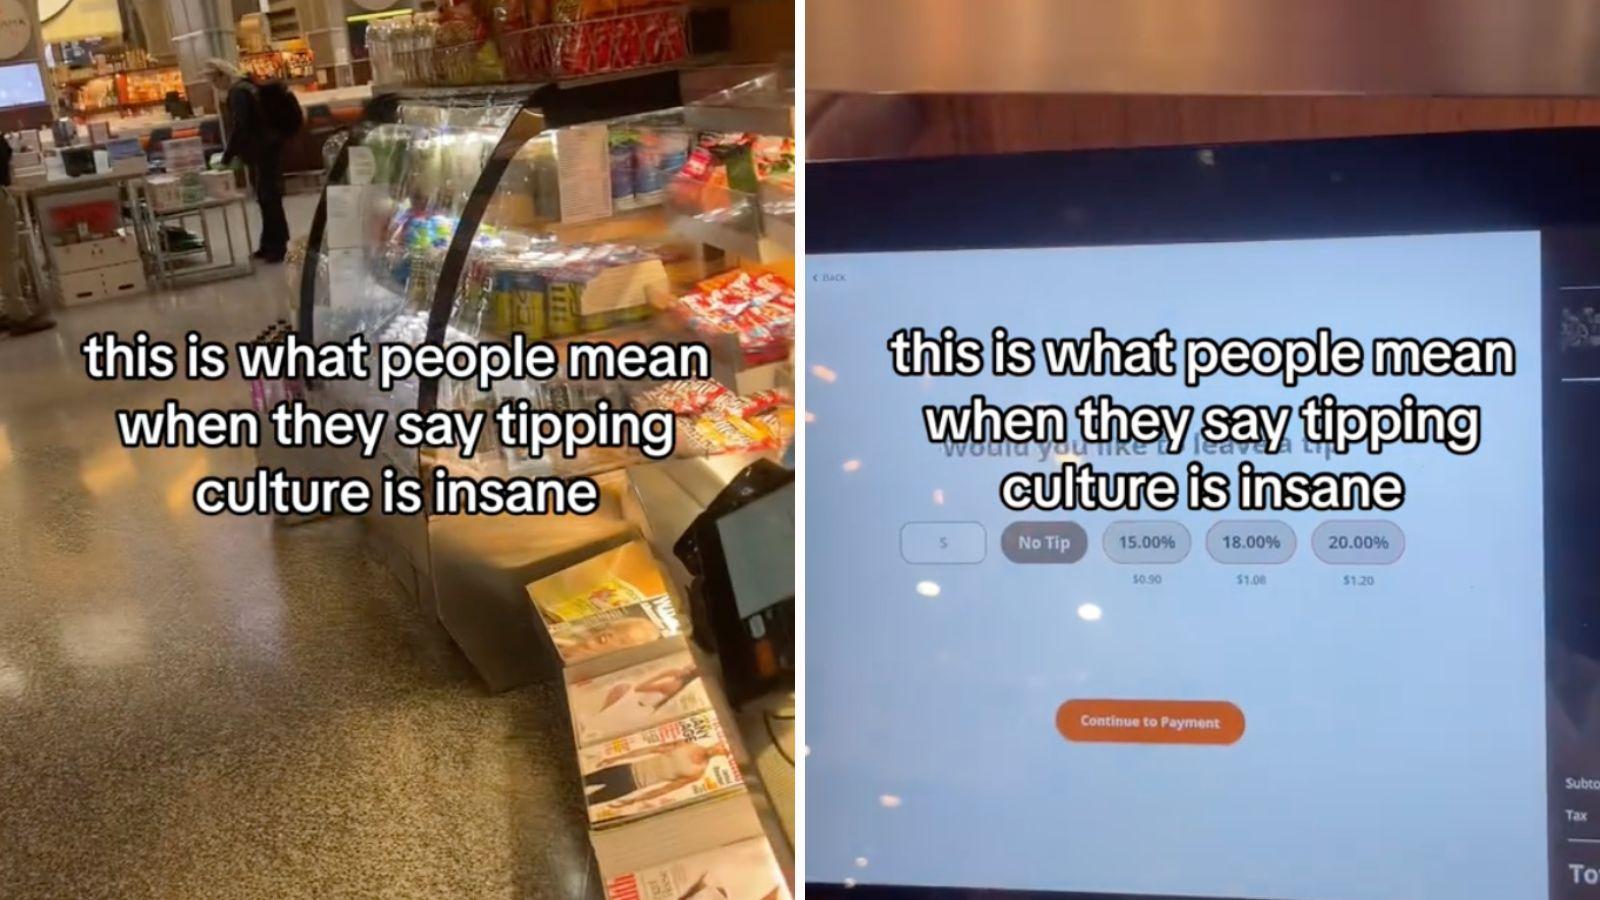 Customer stunned as she’s asked to leave tip for water at self-checkout